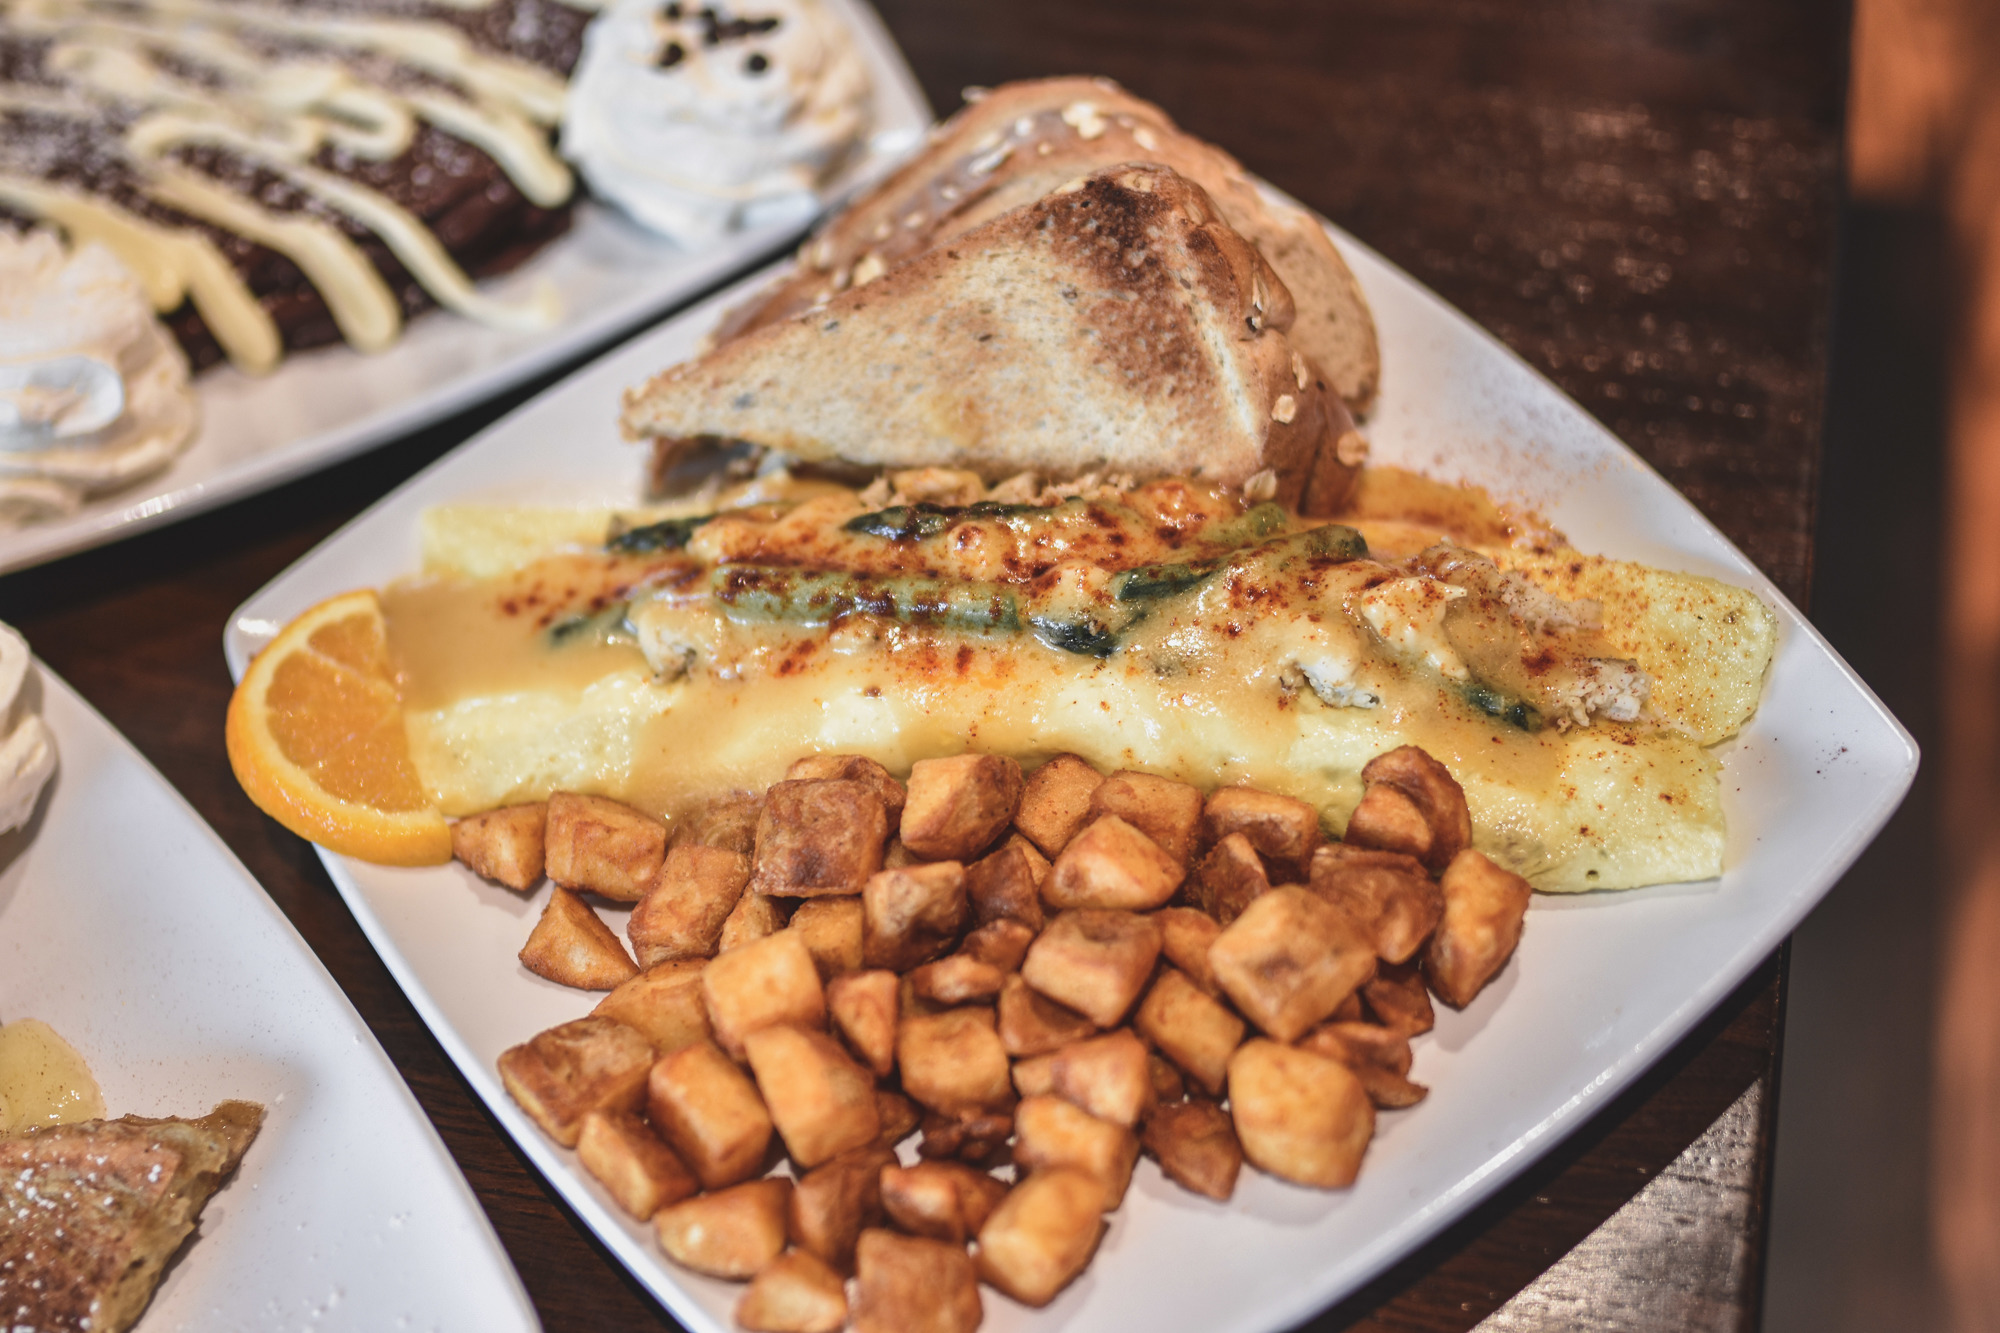 Canopy Road Cafe features build-your-own omelets.